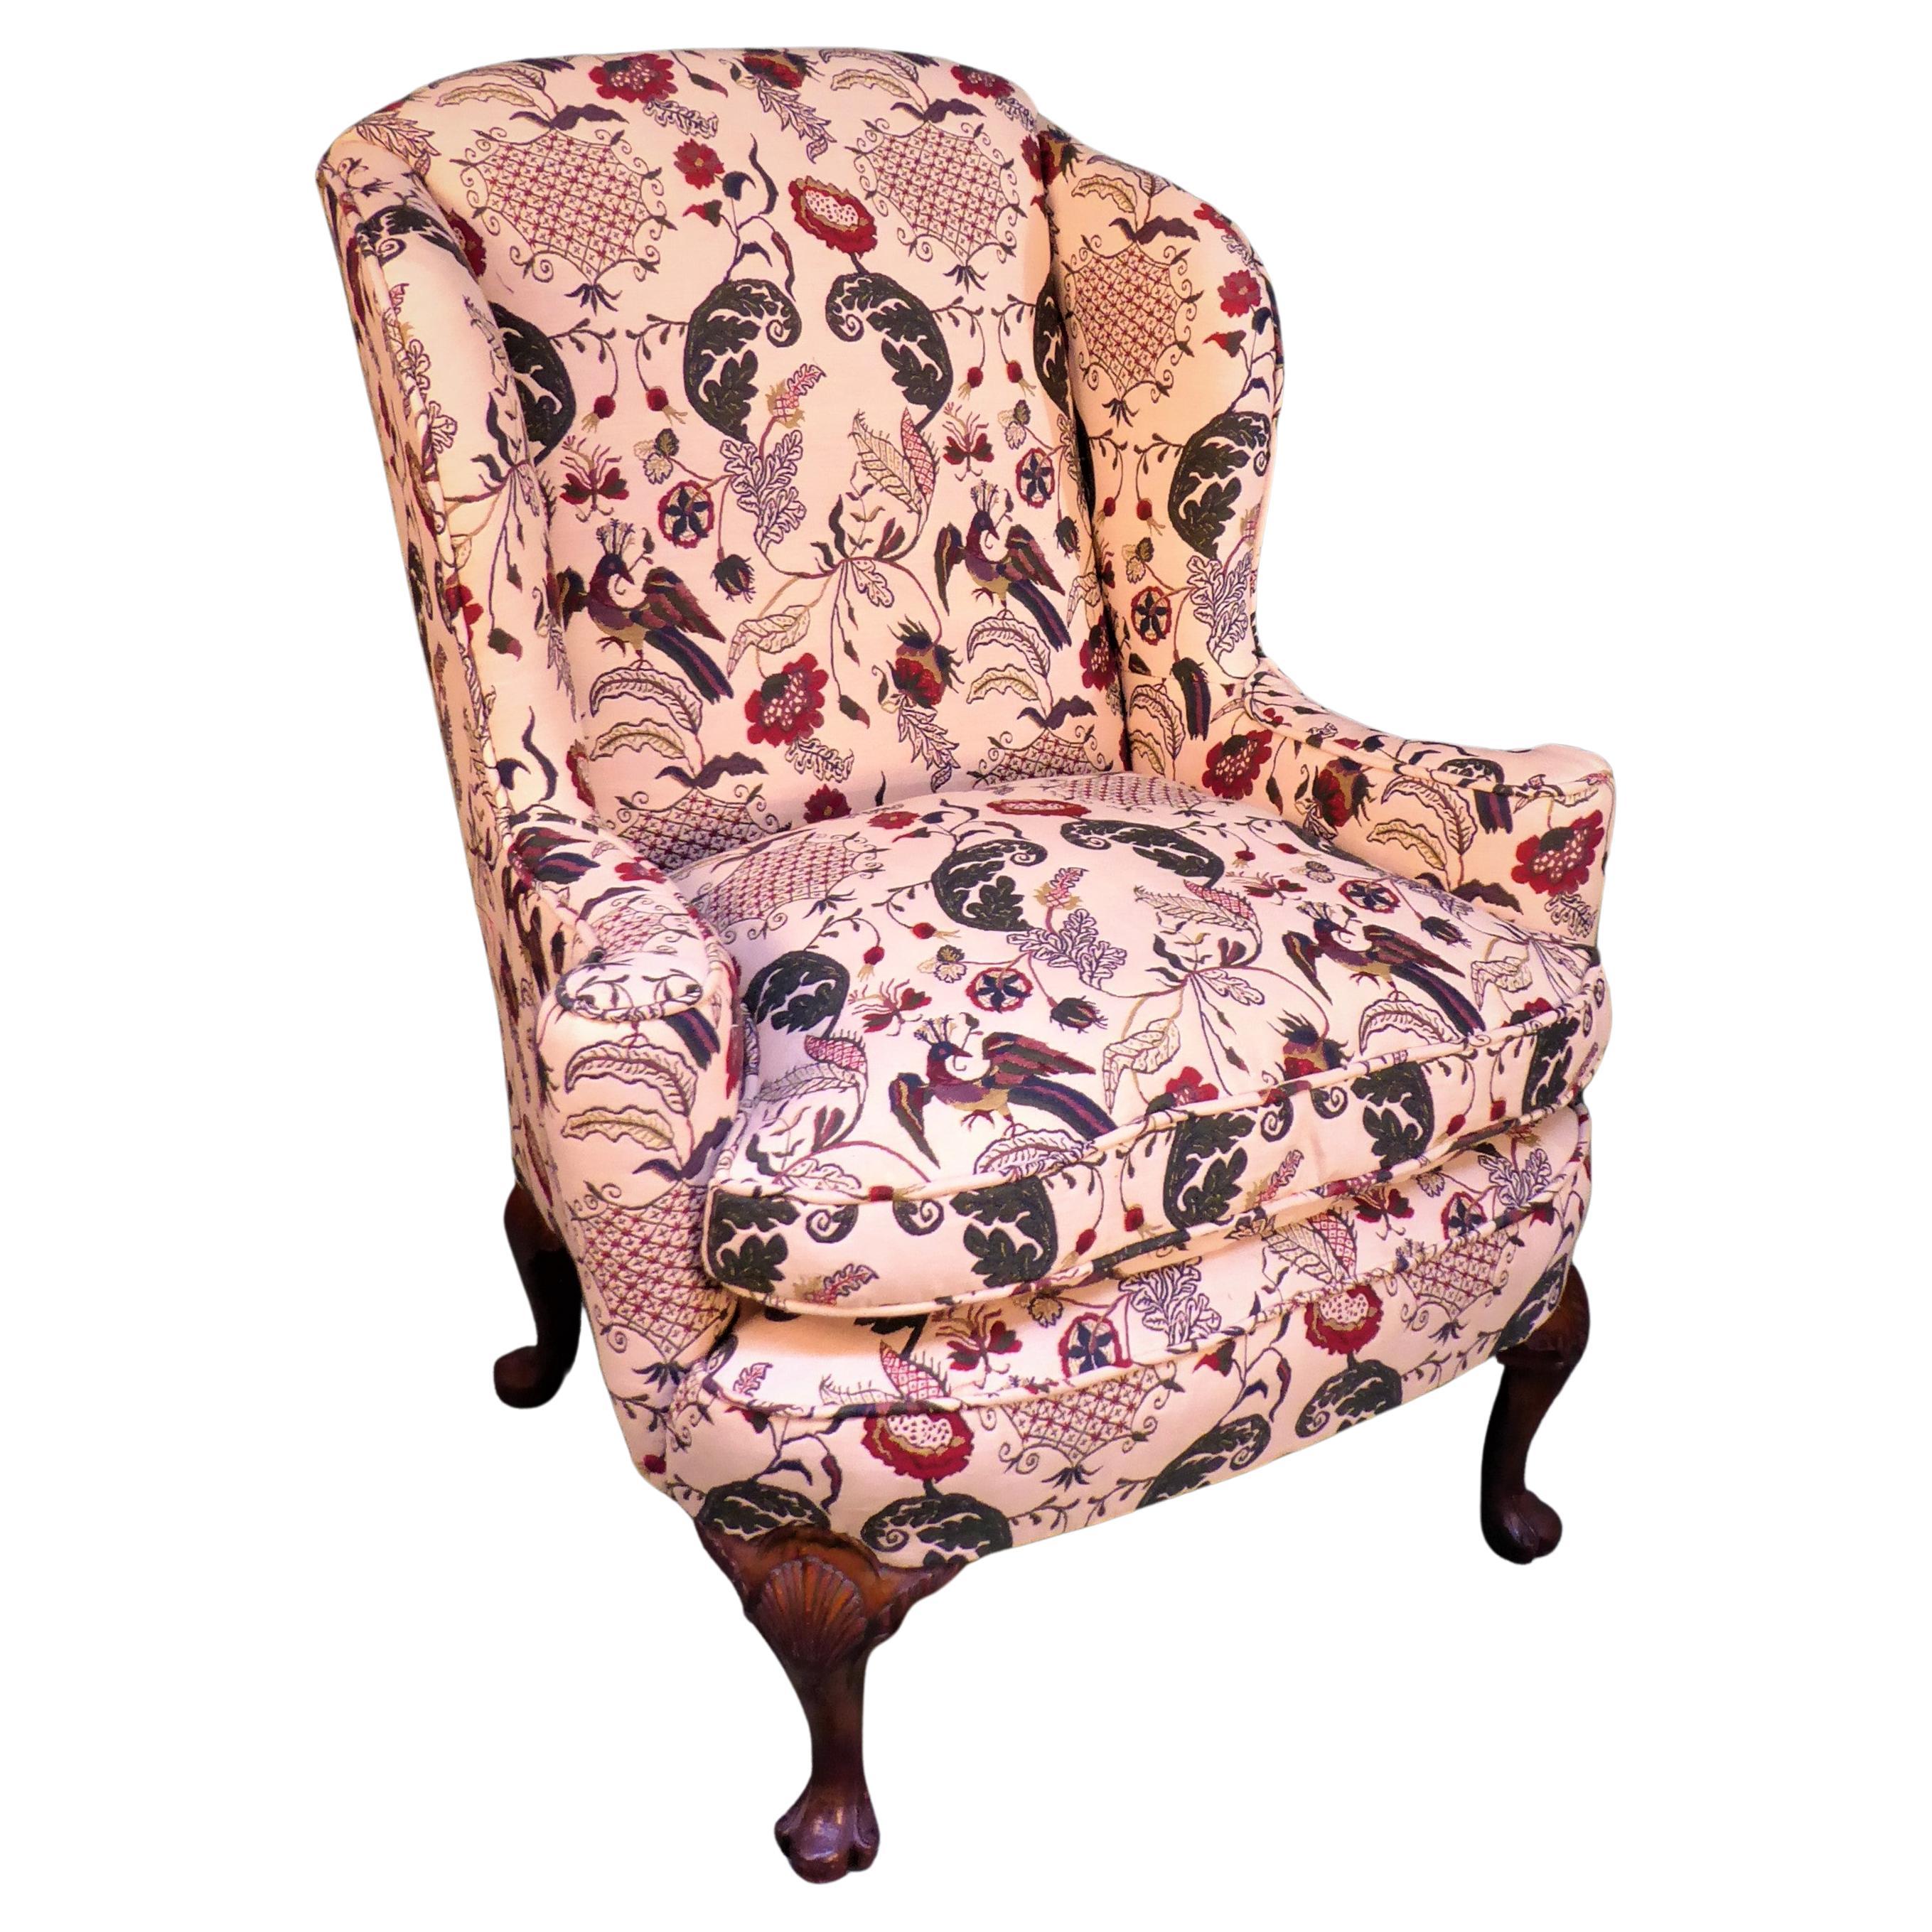 What is a wing chair used for?